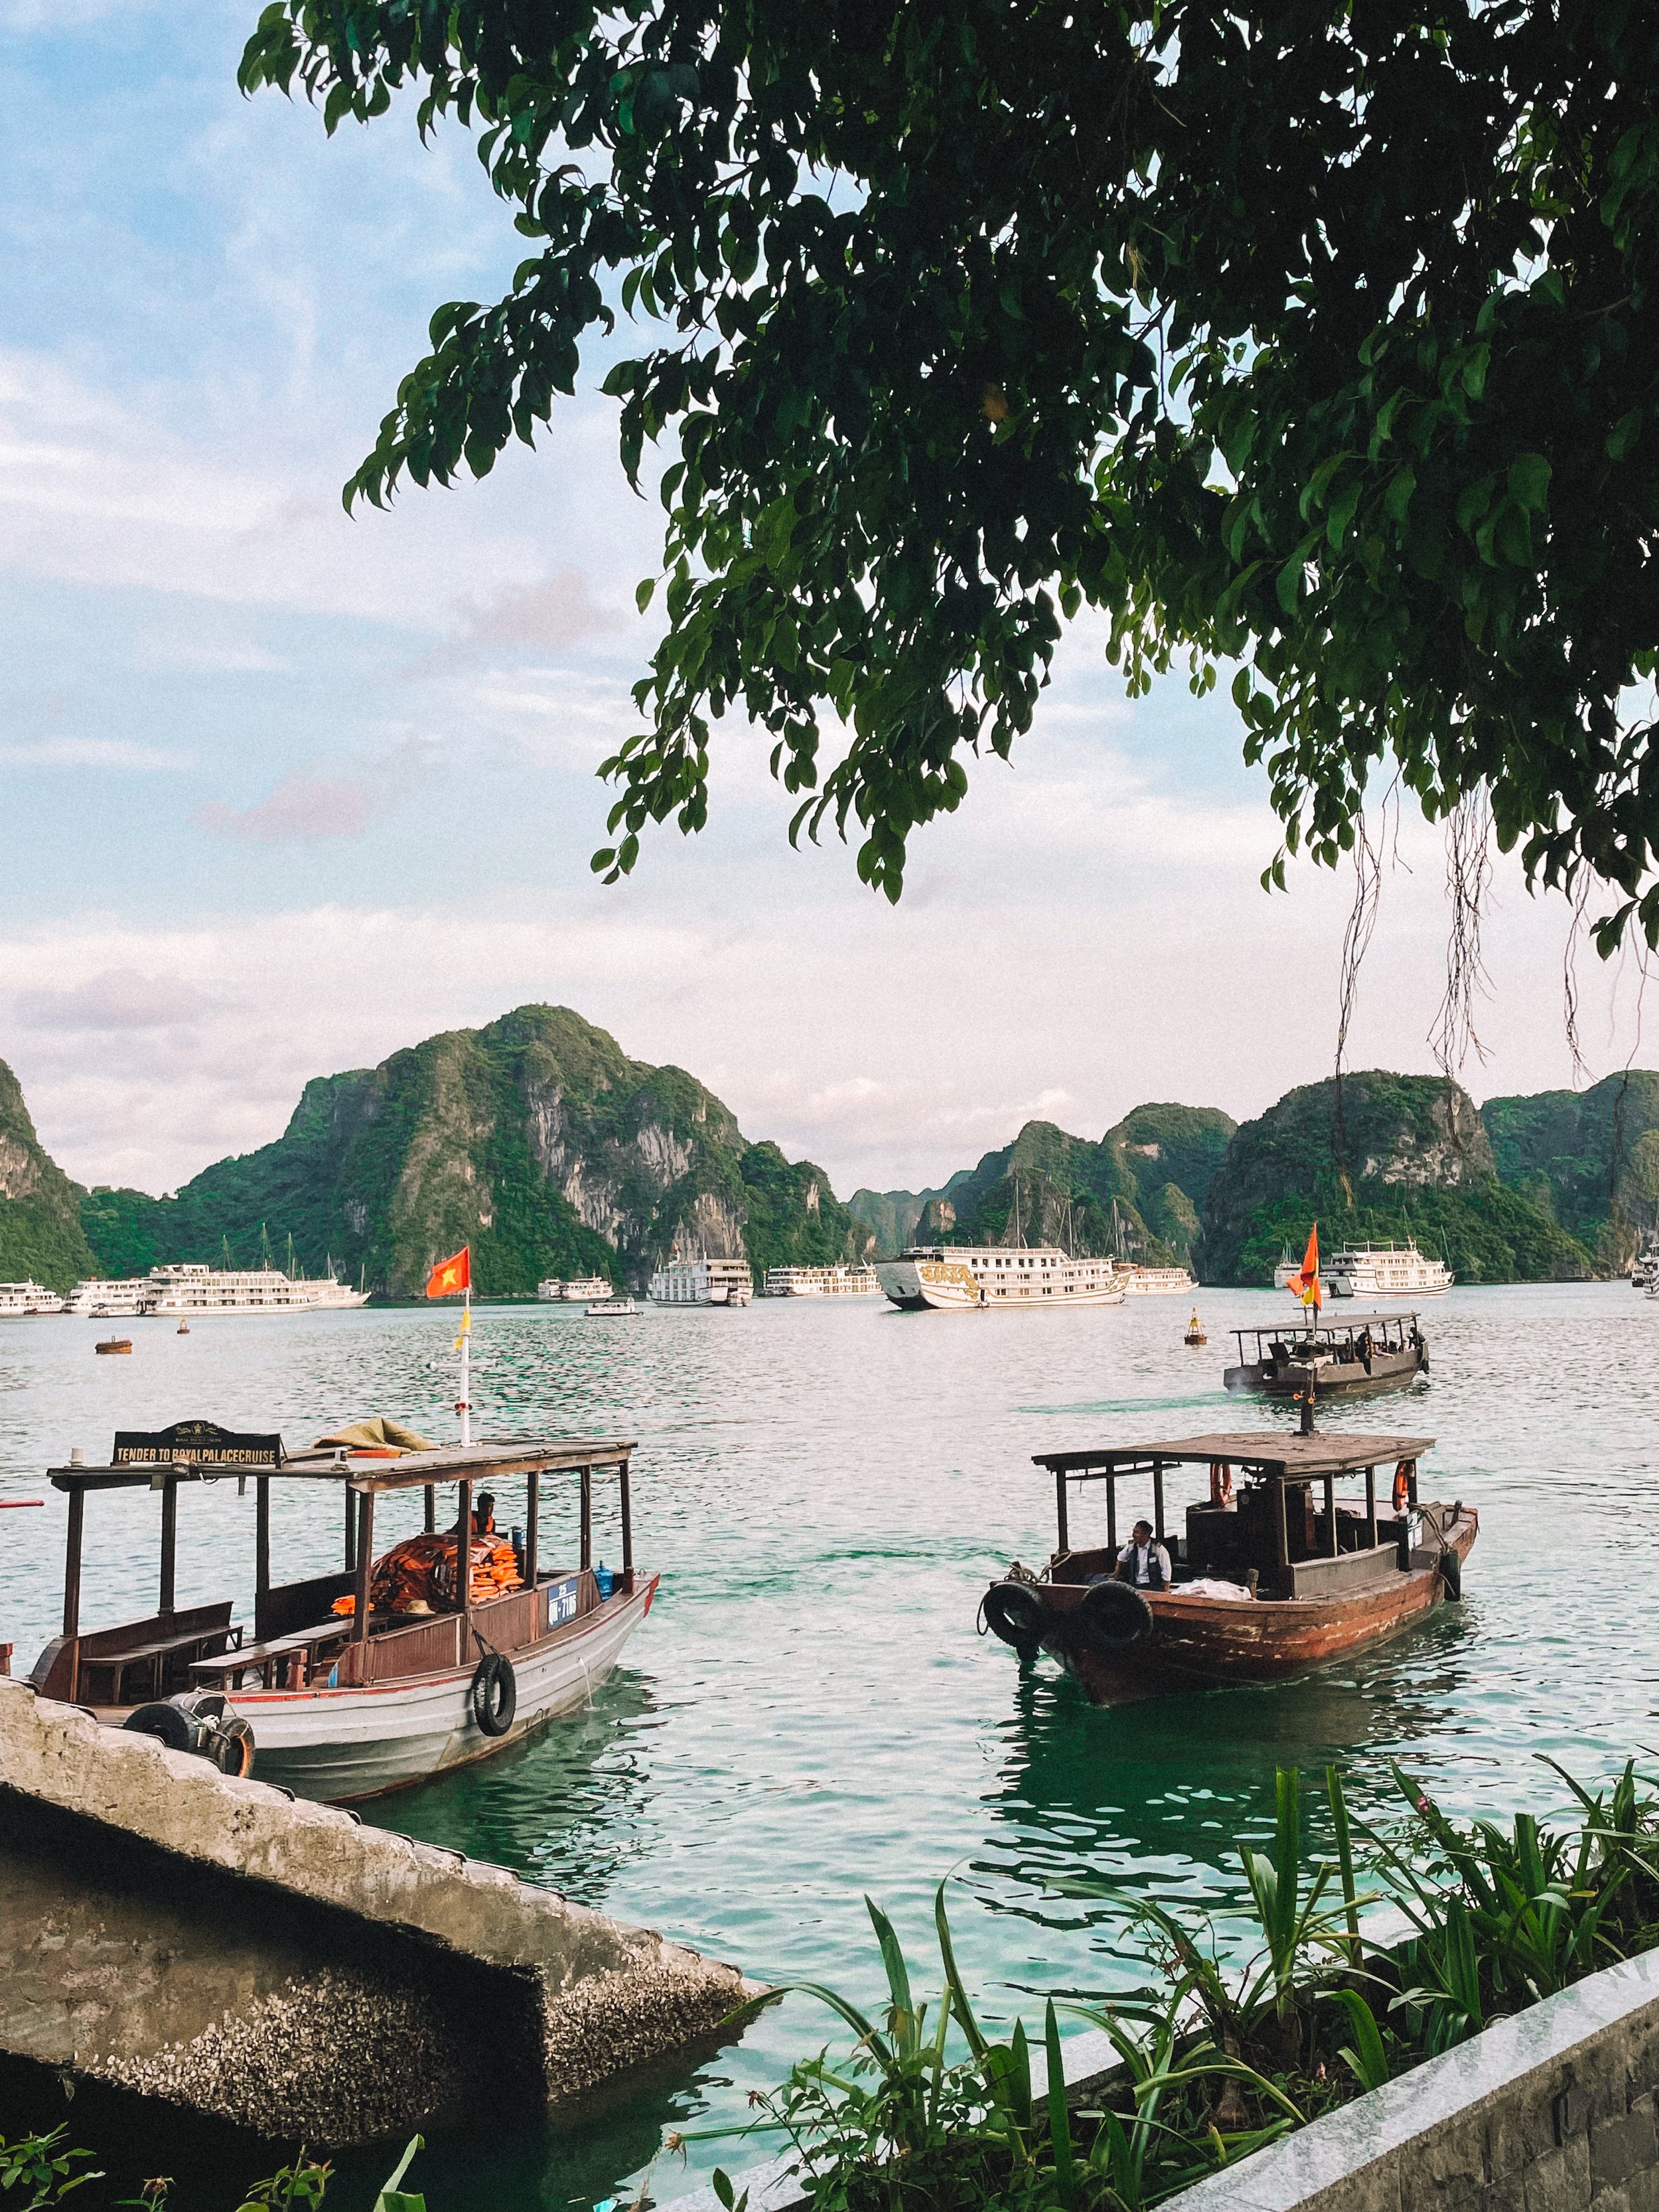 How to visit Halong Bay 